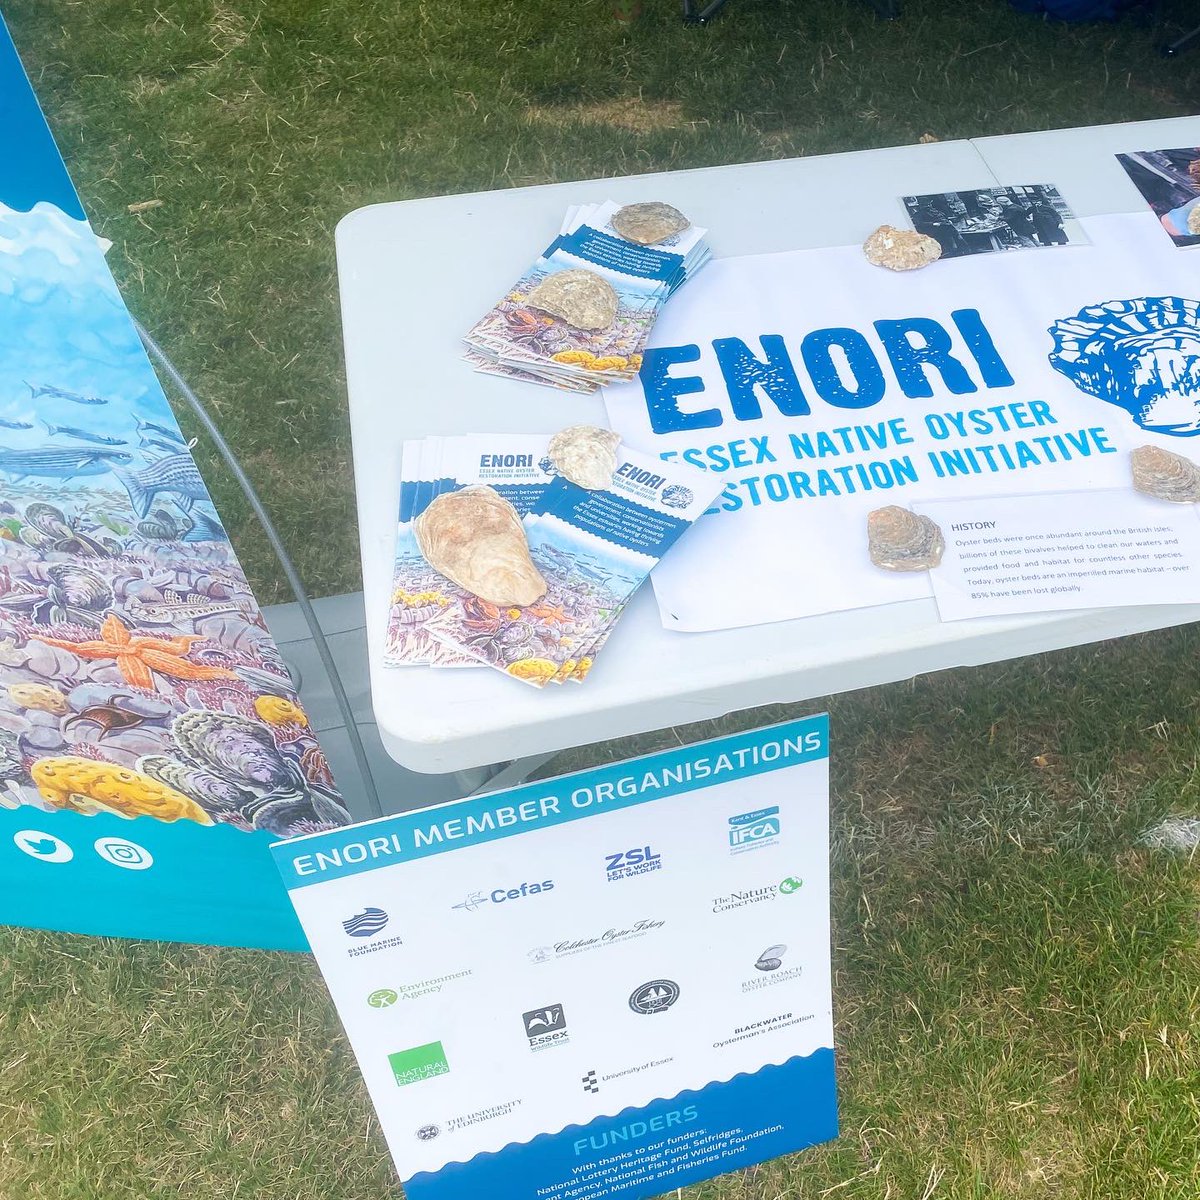 Come and say hello to us at the ENORI stand at the #colchesterromanfestival today in Castle Park to learn about #nativeoyster restoration in Essex!